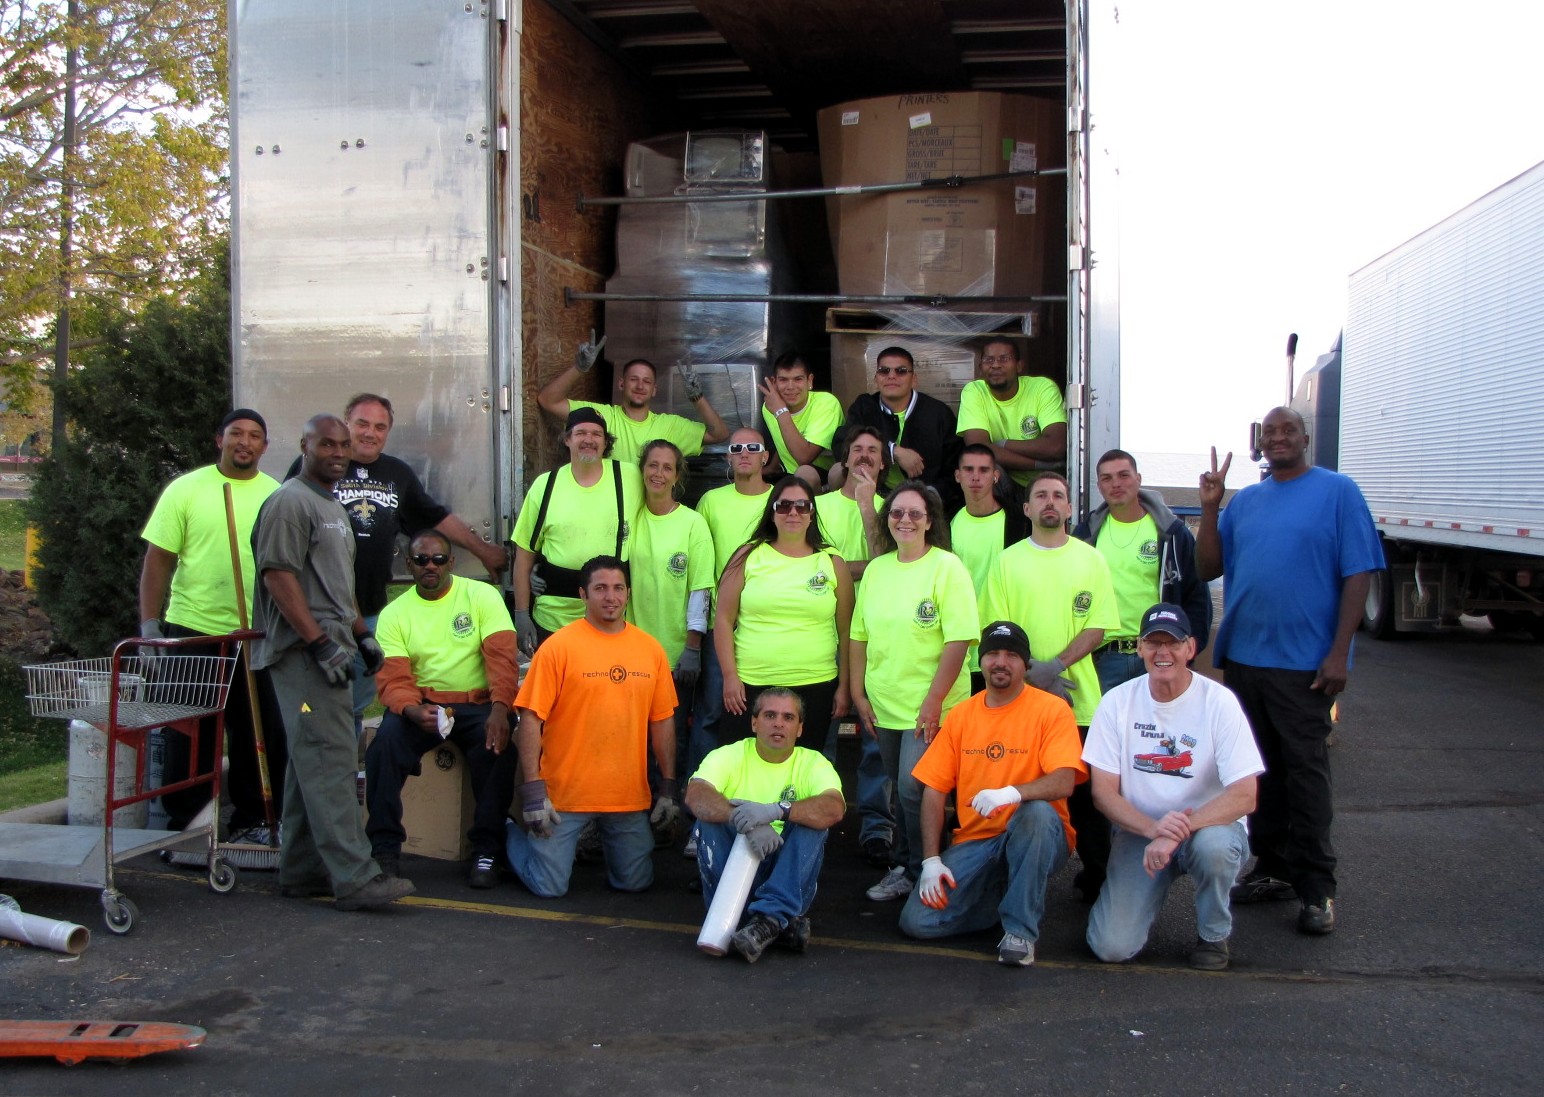 Techno+Rescue will provide secure electronics recycling at the Earth Day 2014 event.